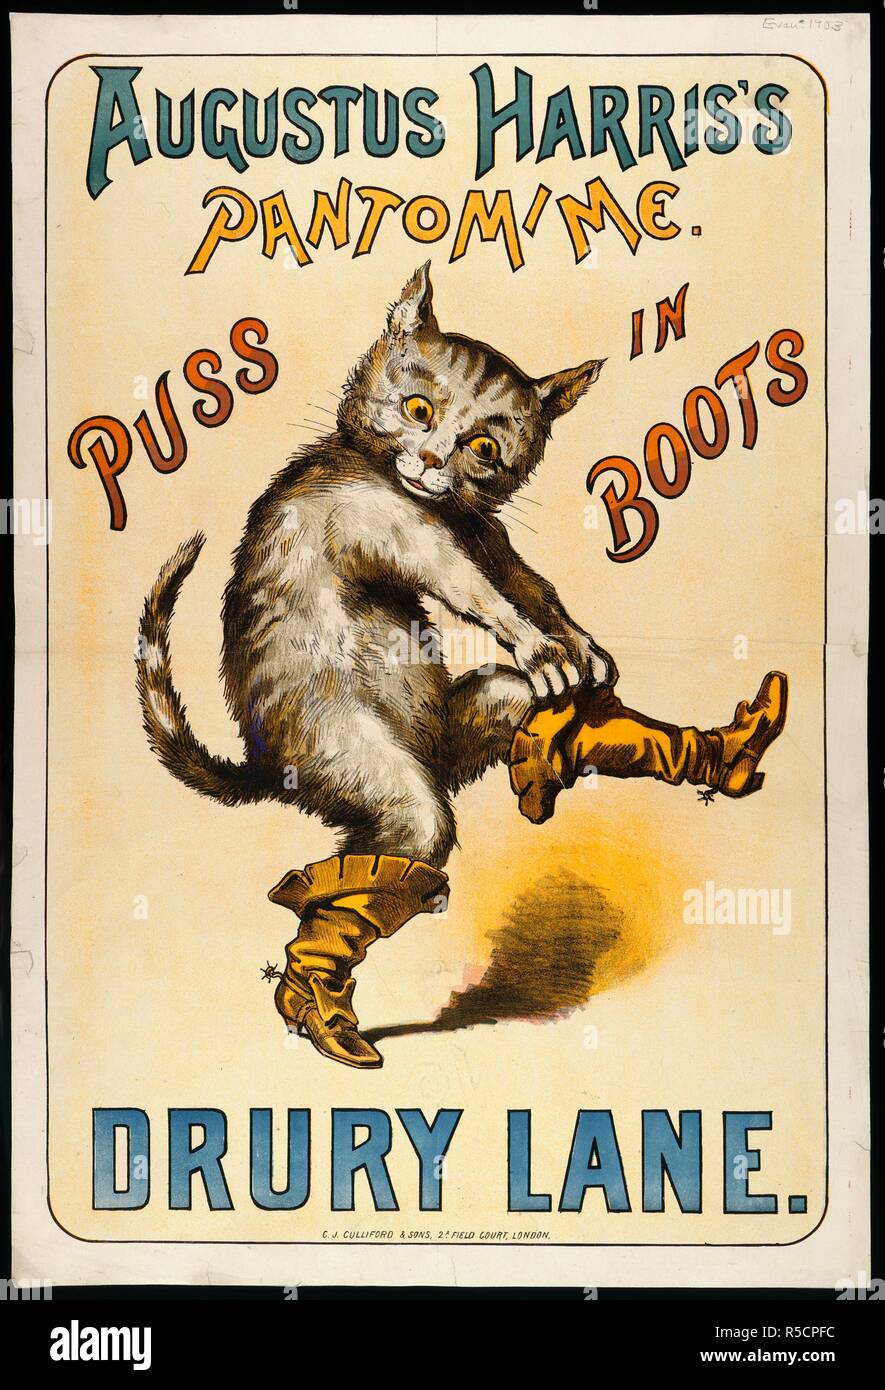 Augustus Harris's pantomime. Puss in boots. Drury Lane. Chromolithograph of Puss pulling on his boots. A collection of pamphlets, handbills, and miscellaneous printed matter relating to Victorian entertainment and everyday life. London, [1885?]. Source: EVAN.1903. Language: English. Author: Evanion, Henry. Stock Photo